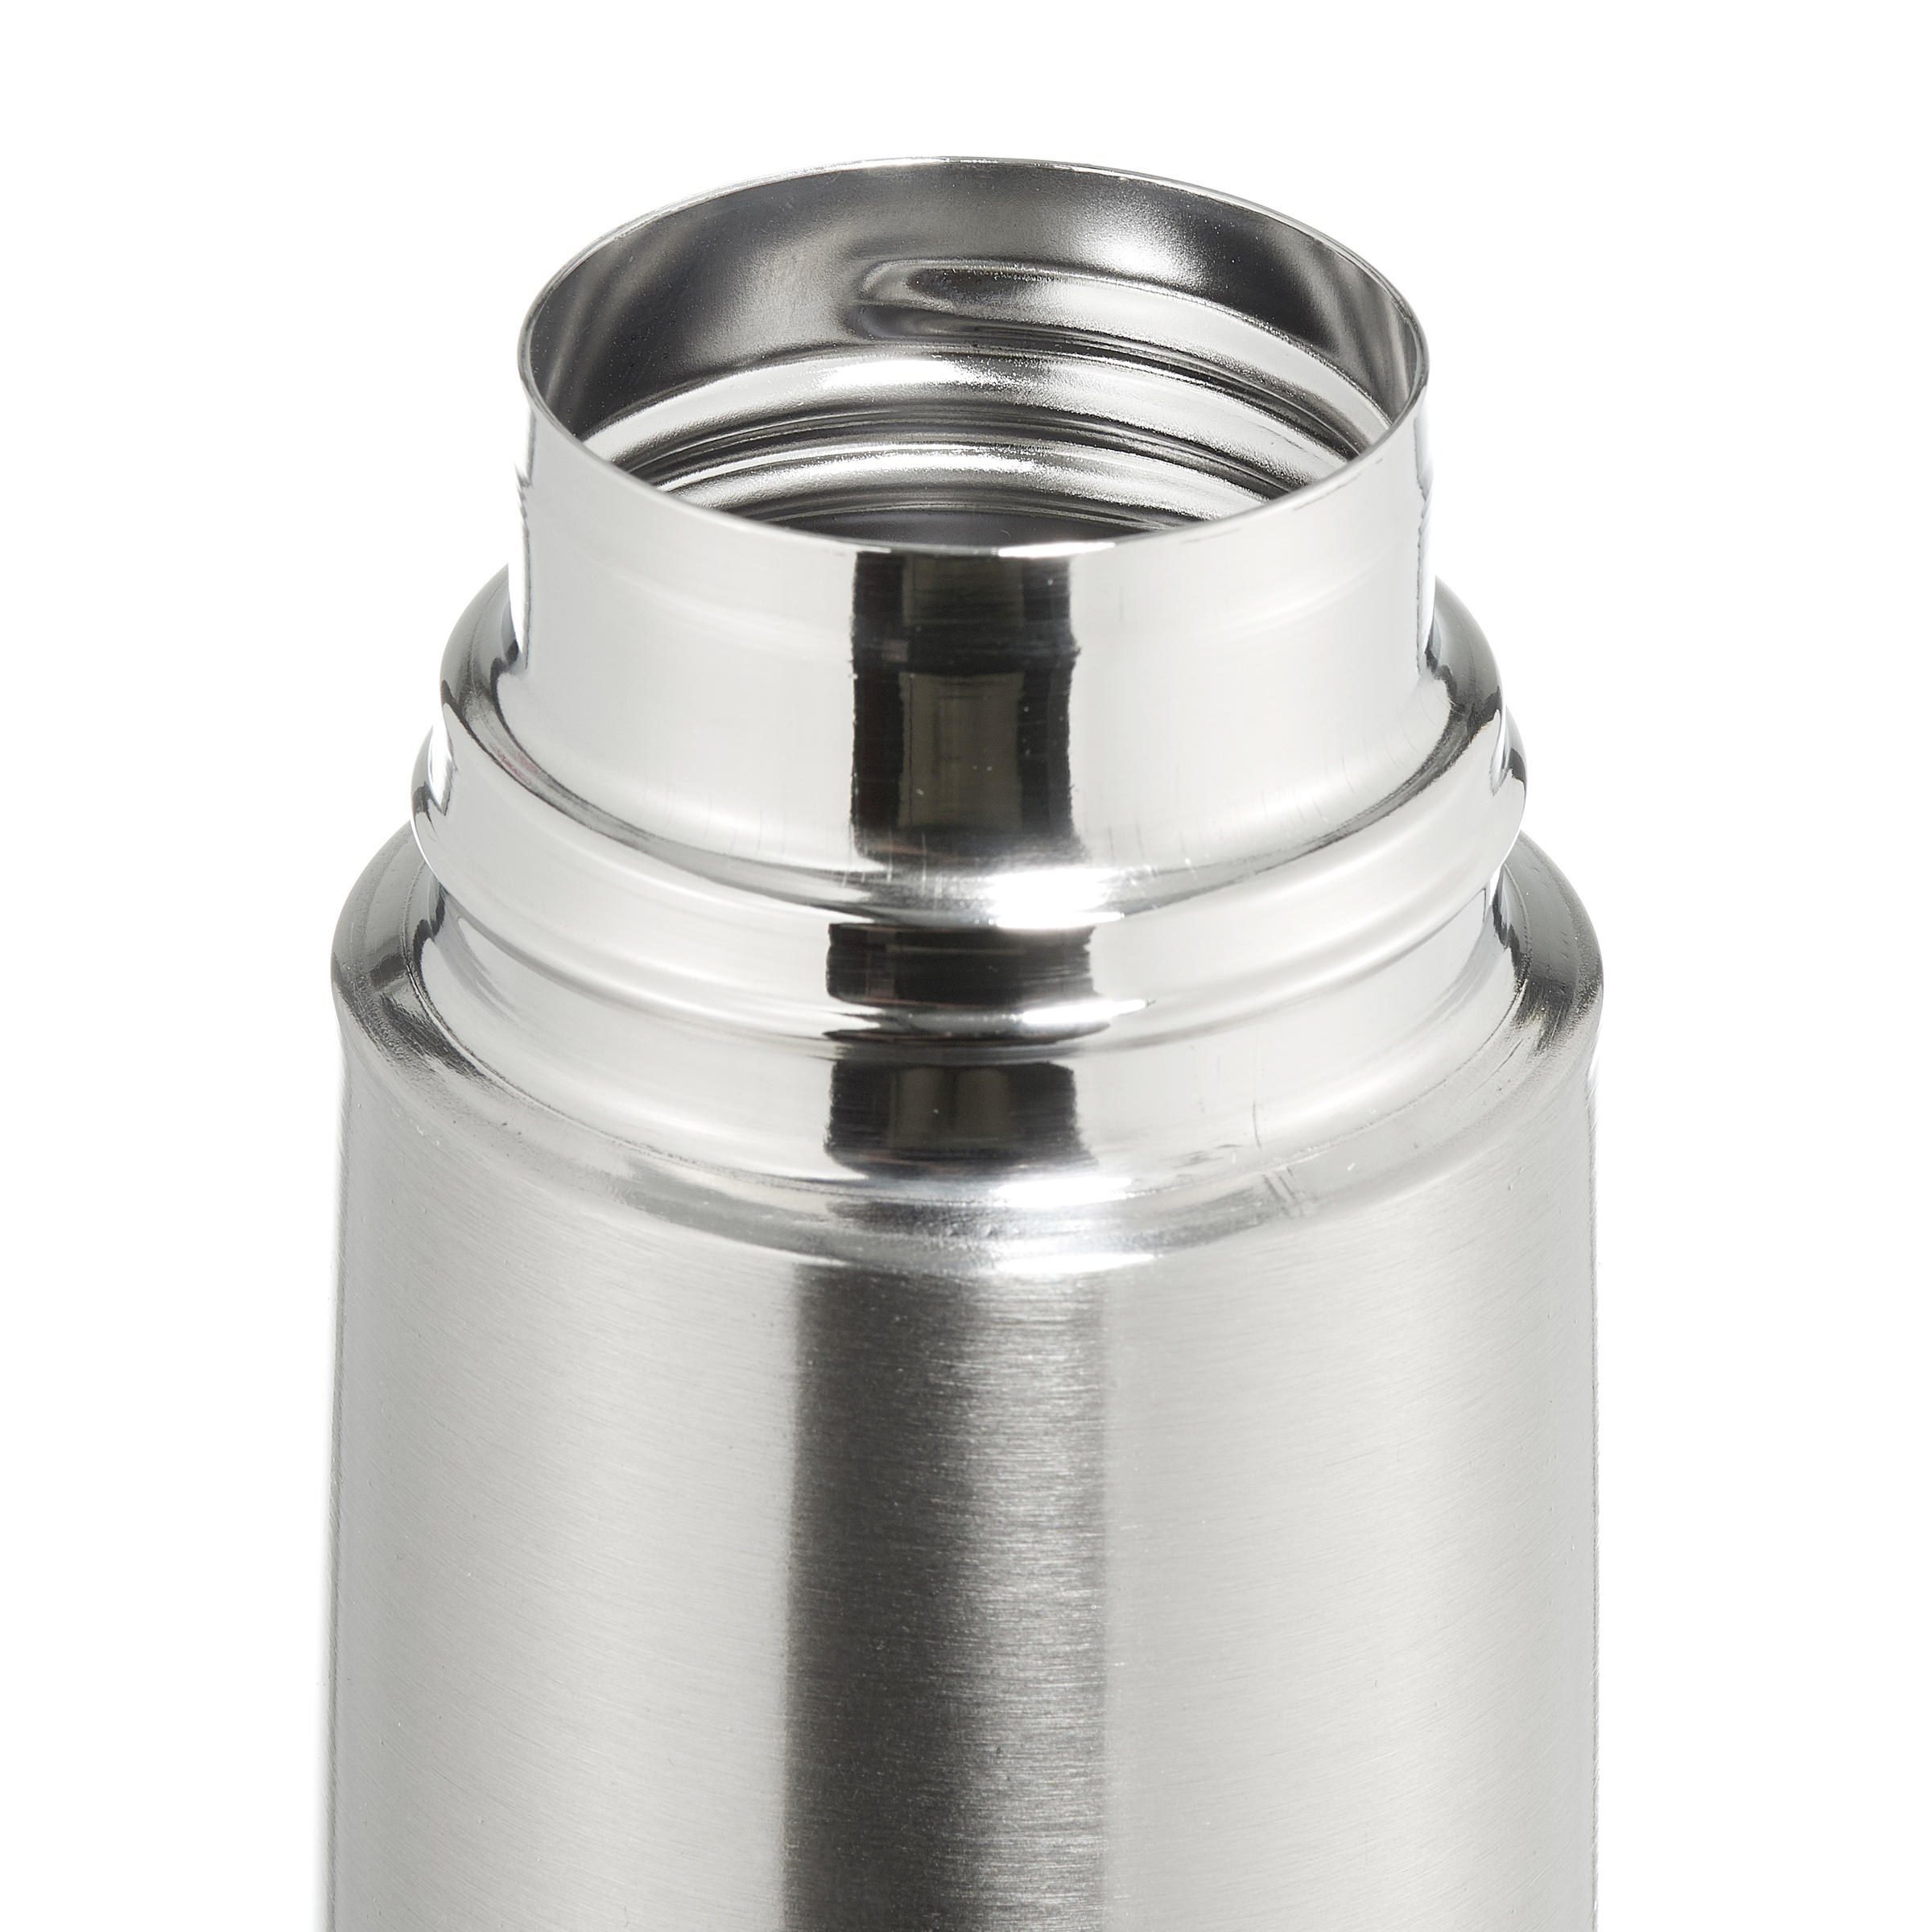 Stainless steel 0.7 L insulated bottle with cup for hiking - metal 7/10